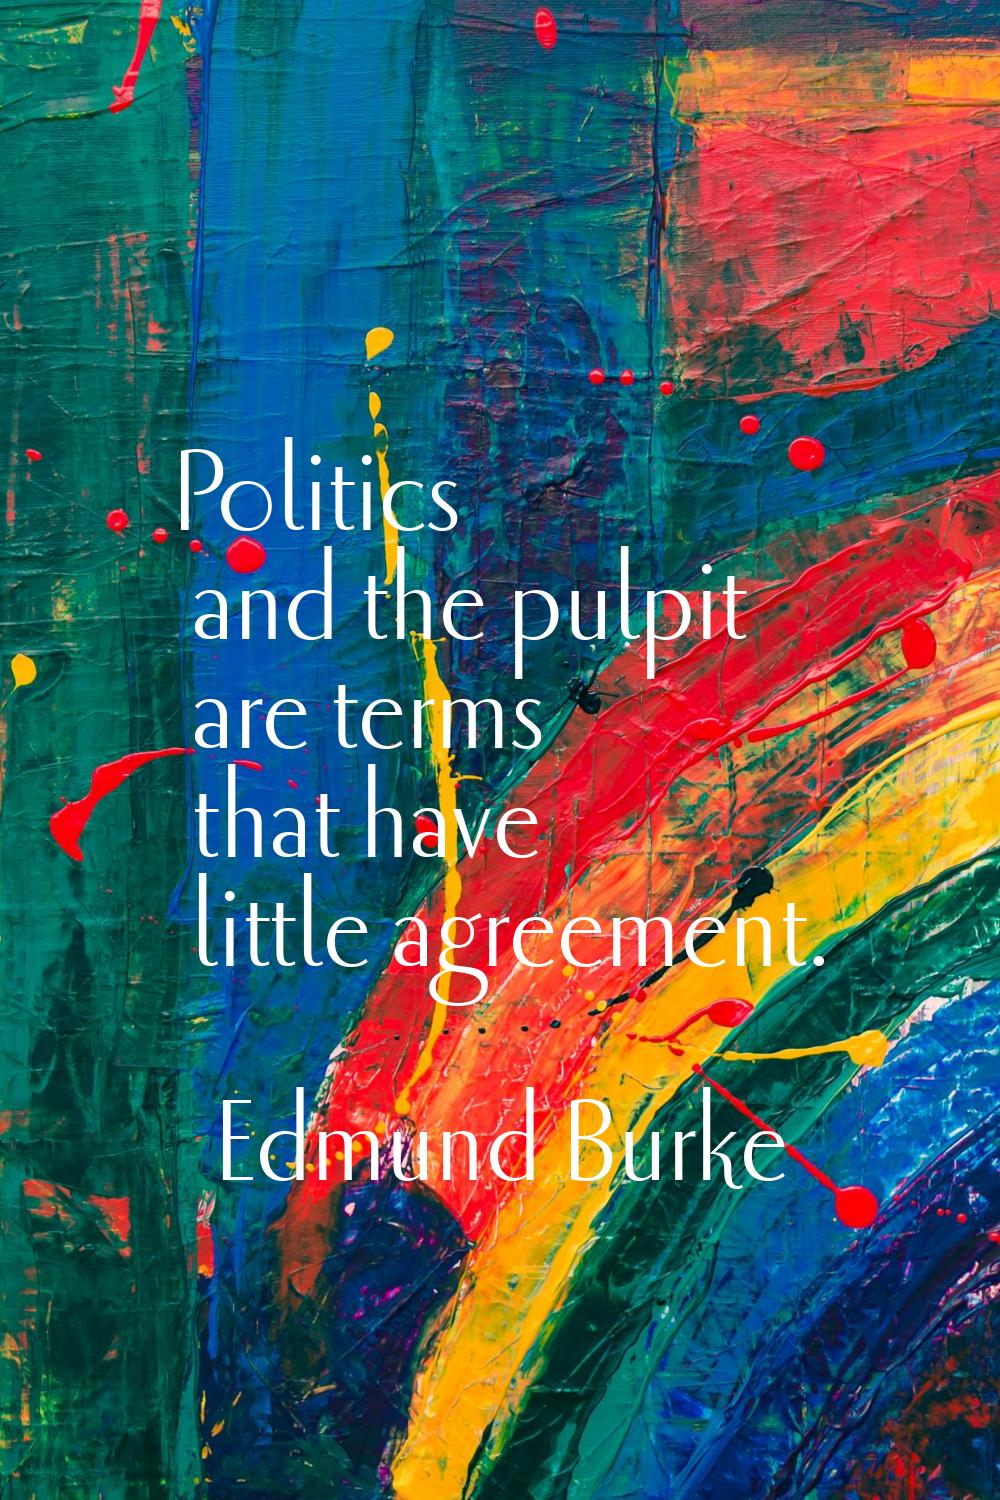 Politics and the pulpit are terms that have little agreement.